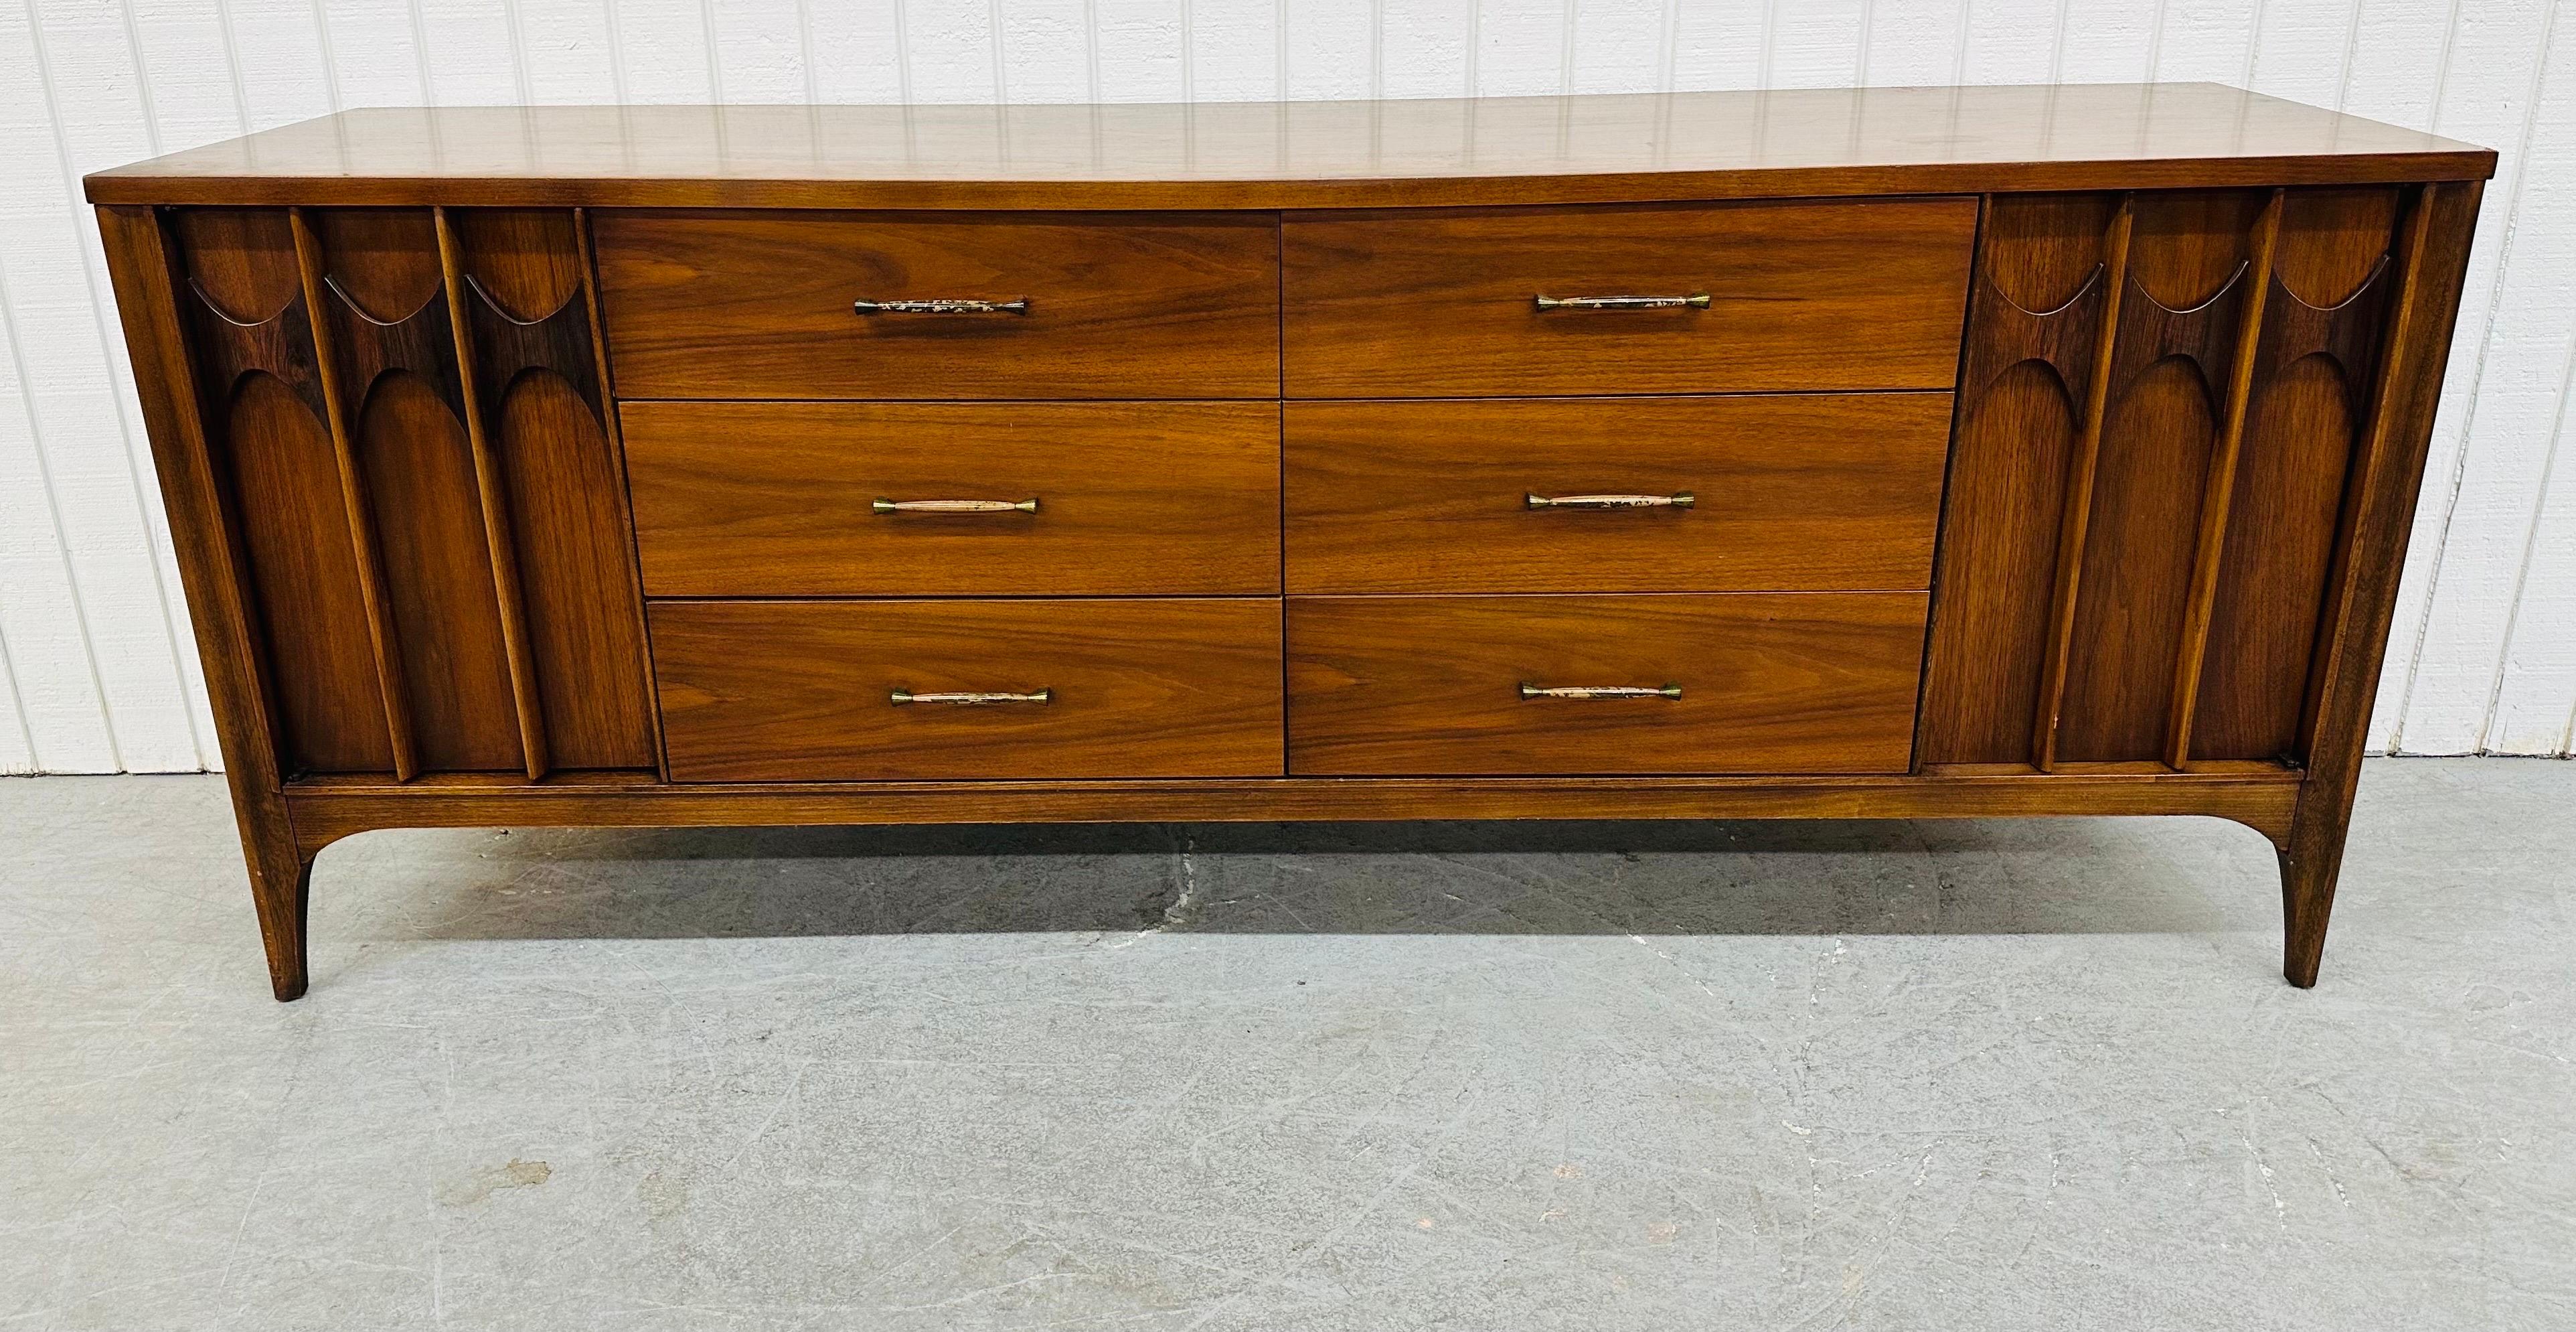 This listing is for a Mid-Century Modern Kent Coffey Perspecta Walnut Dresser. Featuring a straight line design, two doors with sculpted rosewood pulls that open up to three hidden drawers, six larger center drawers, original hardware, and a